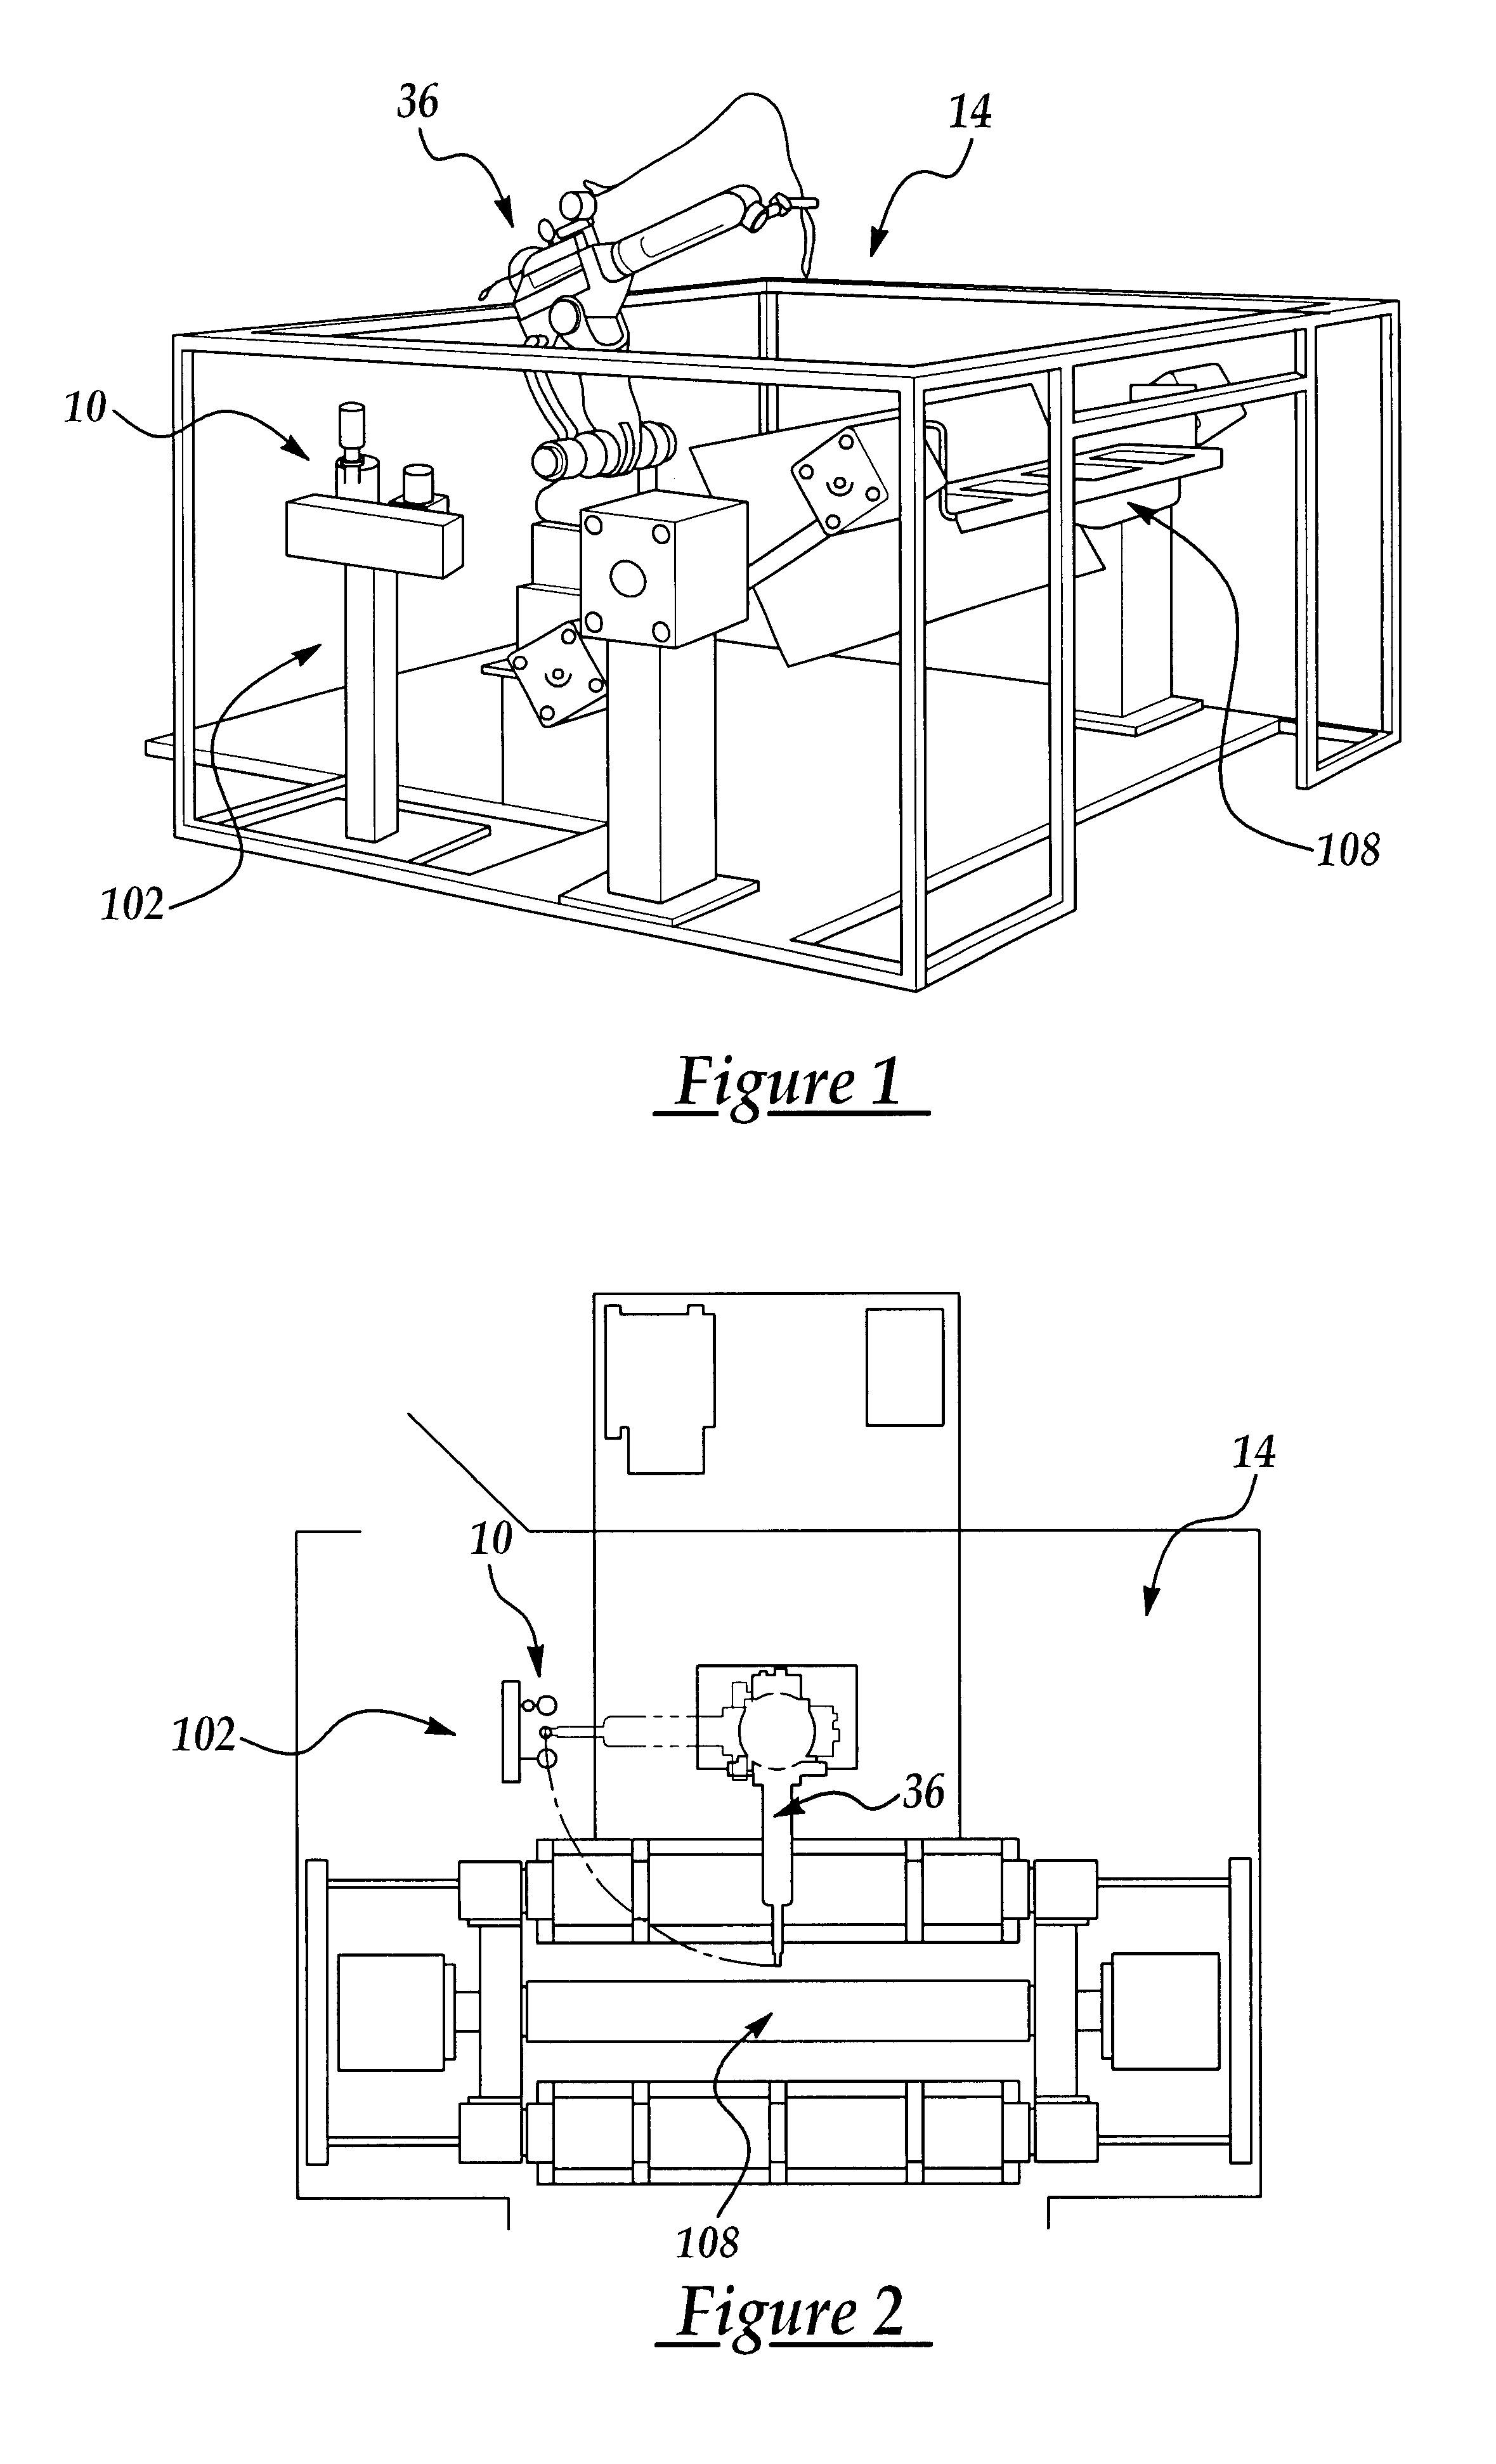 Implementation system for continuous welding, method, and products for the implementation of the system and/or method